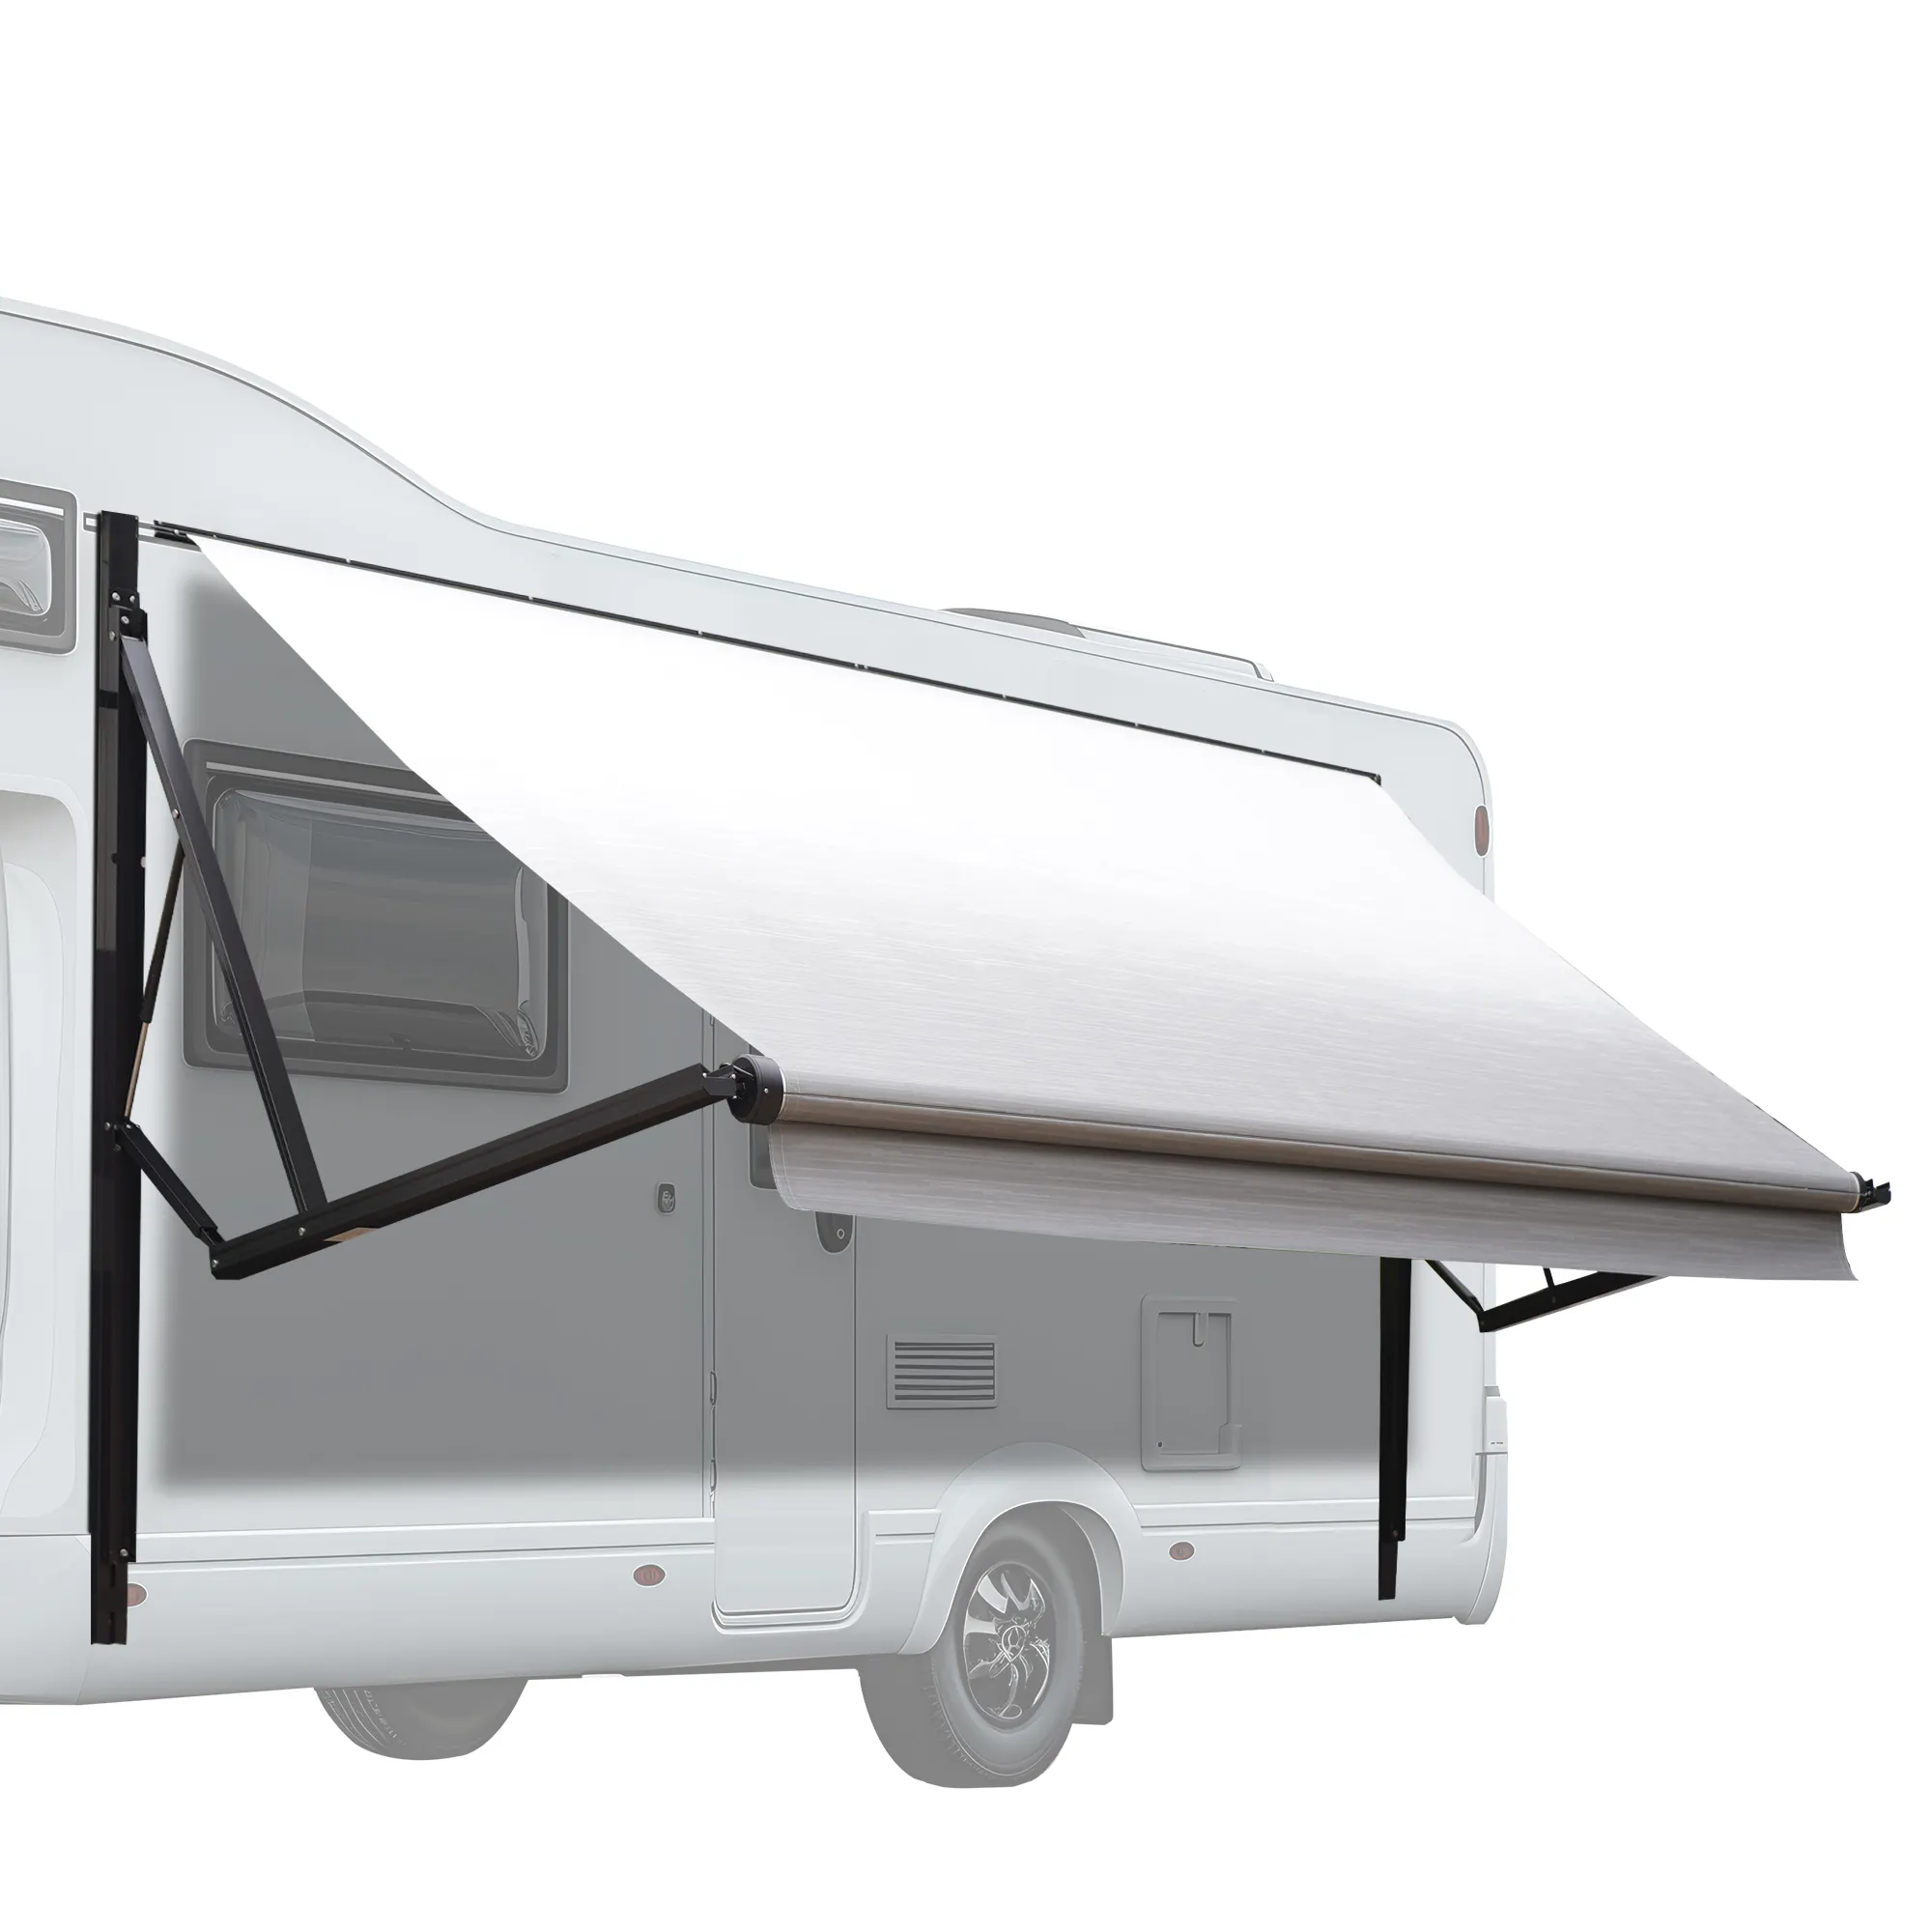 Awnlux White Motorized Modular Retractable Motorhome Trailer 5th Wheel RV Awning with Ocean Blue fabric